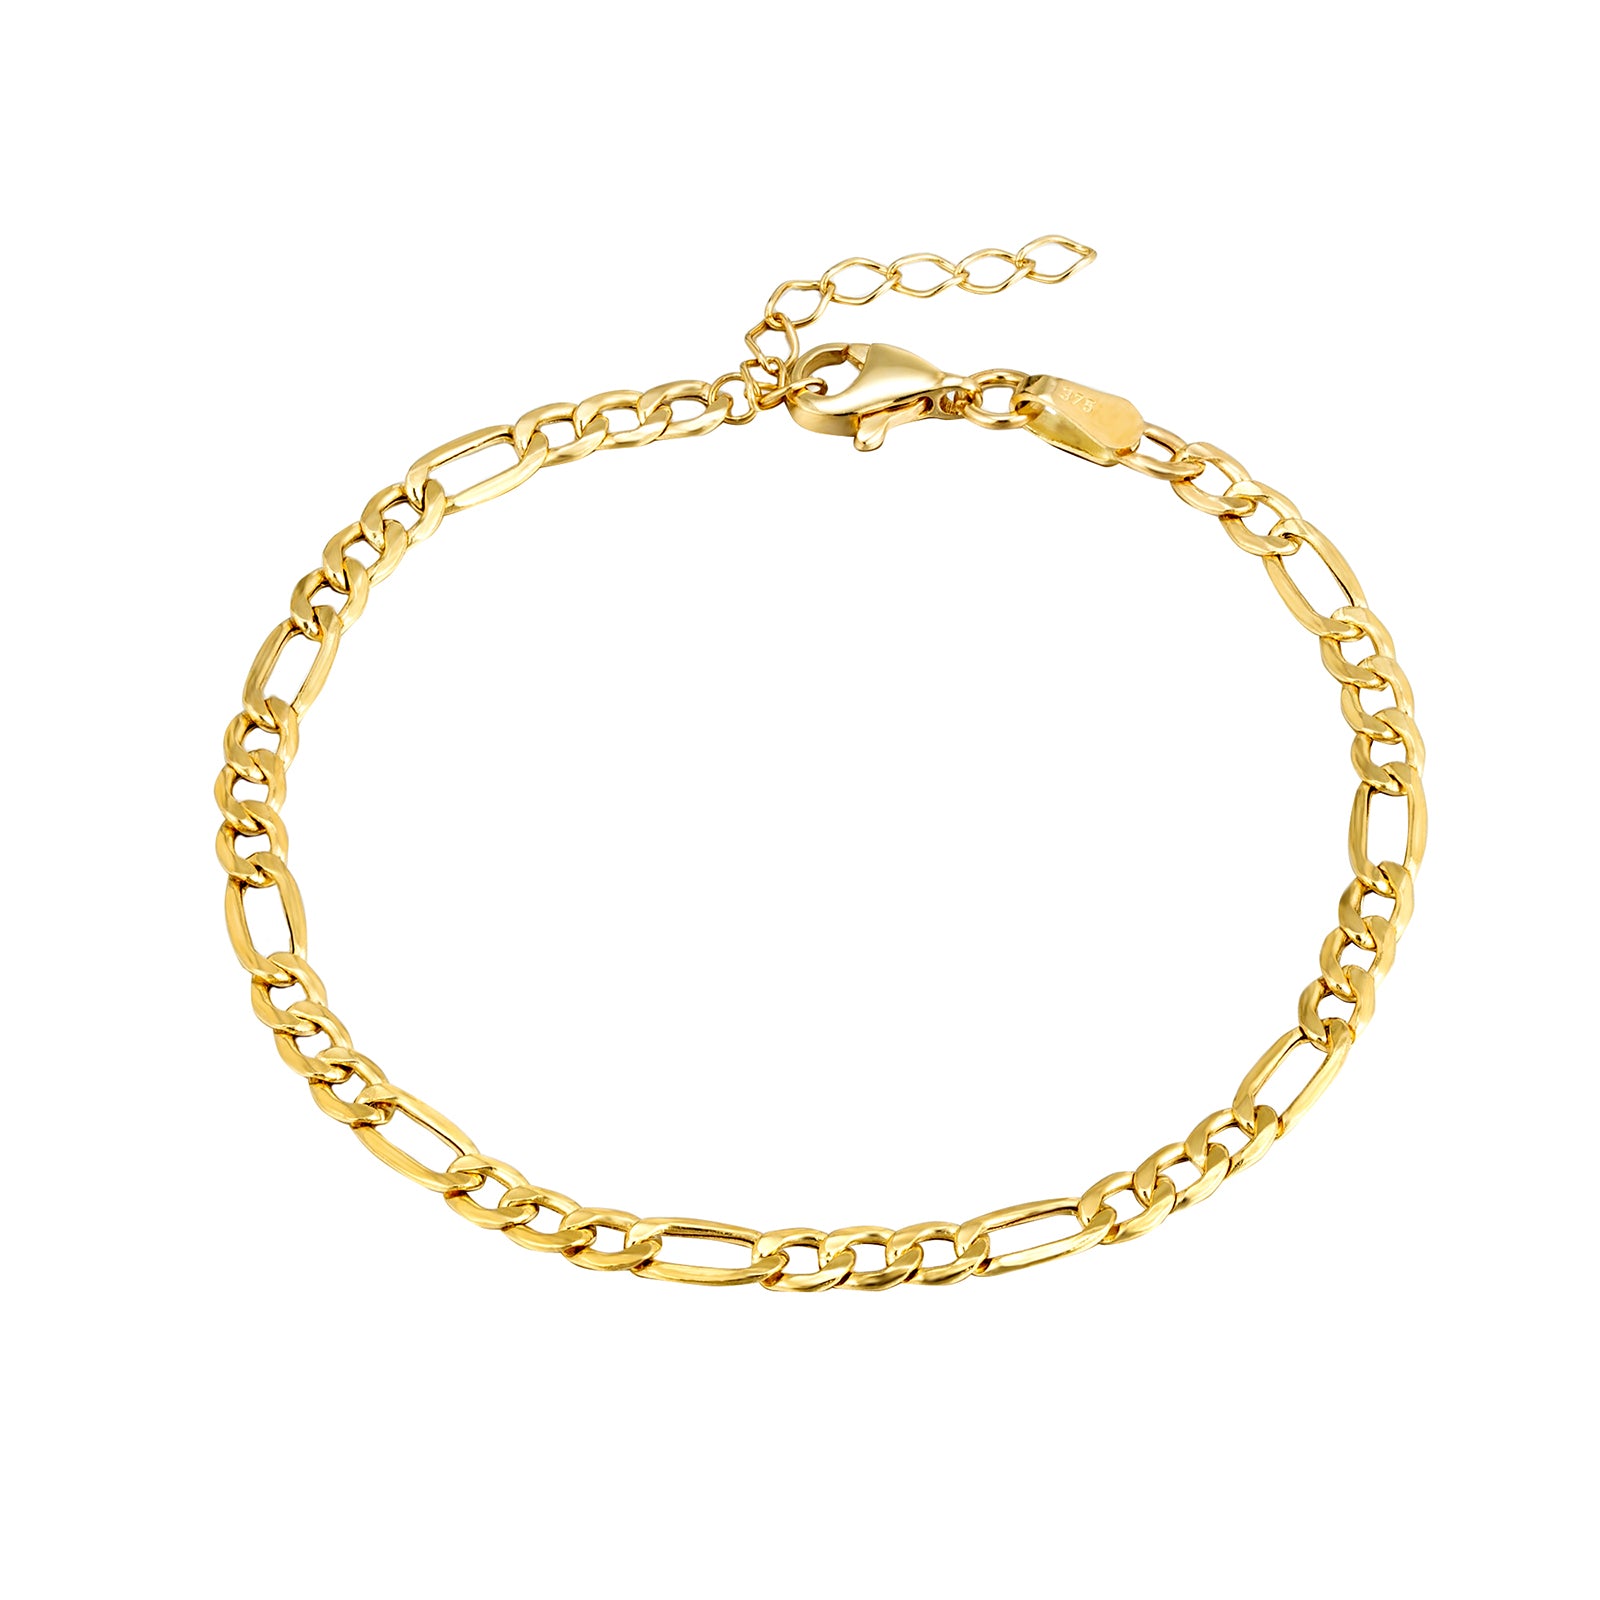 9ct Solid Gold Figaro Chain Bracelet - seolgold